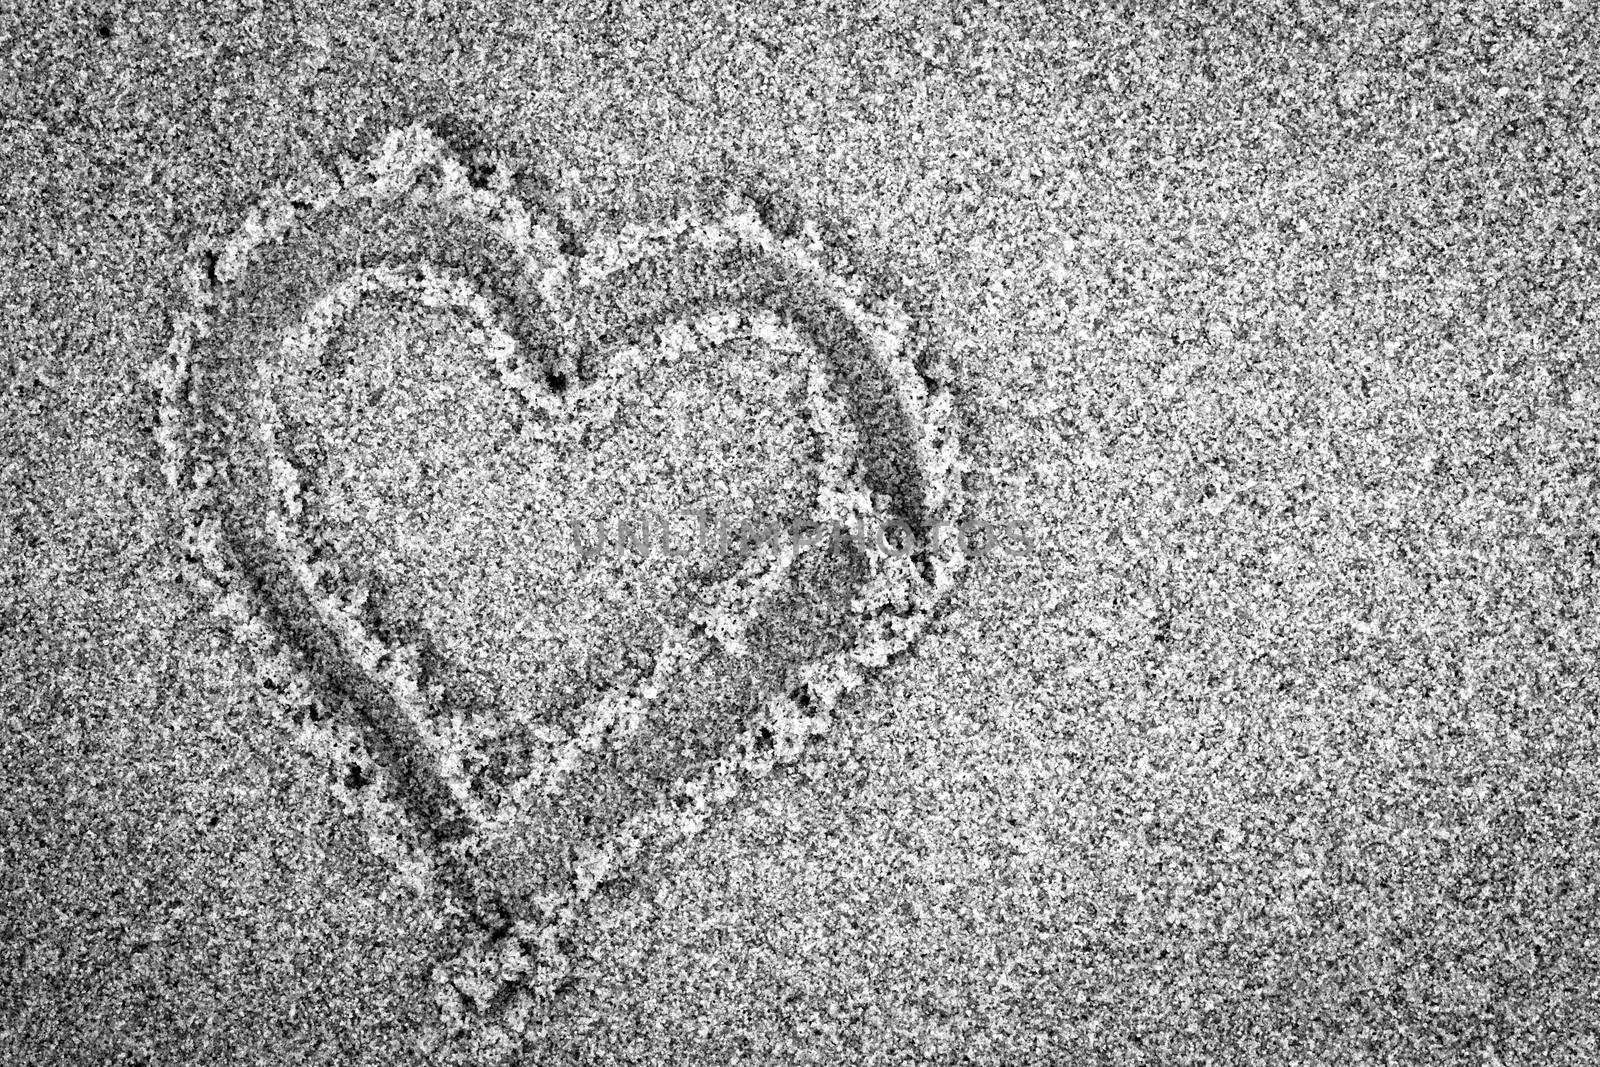 Heart shape on sand. Romantic, black and white by photocreo